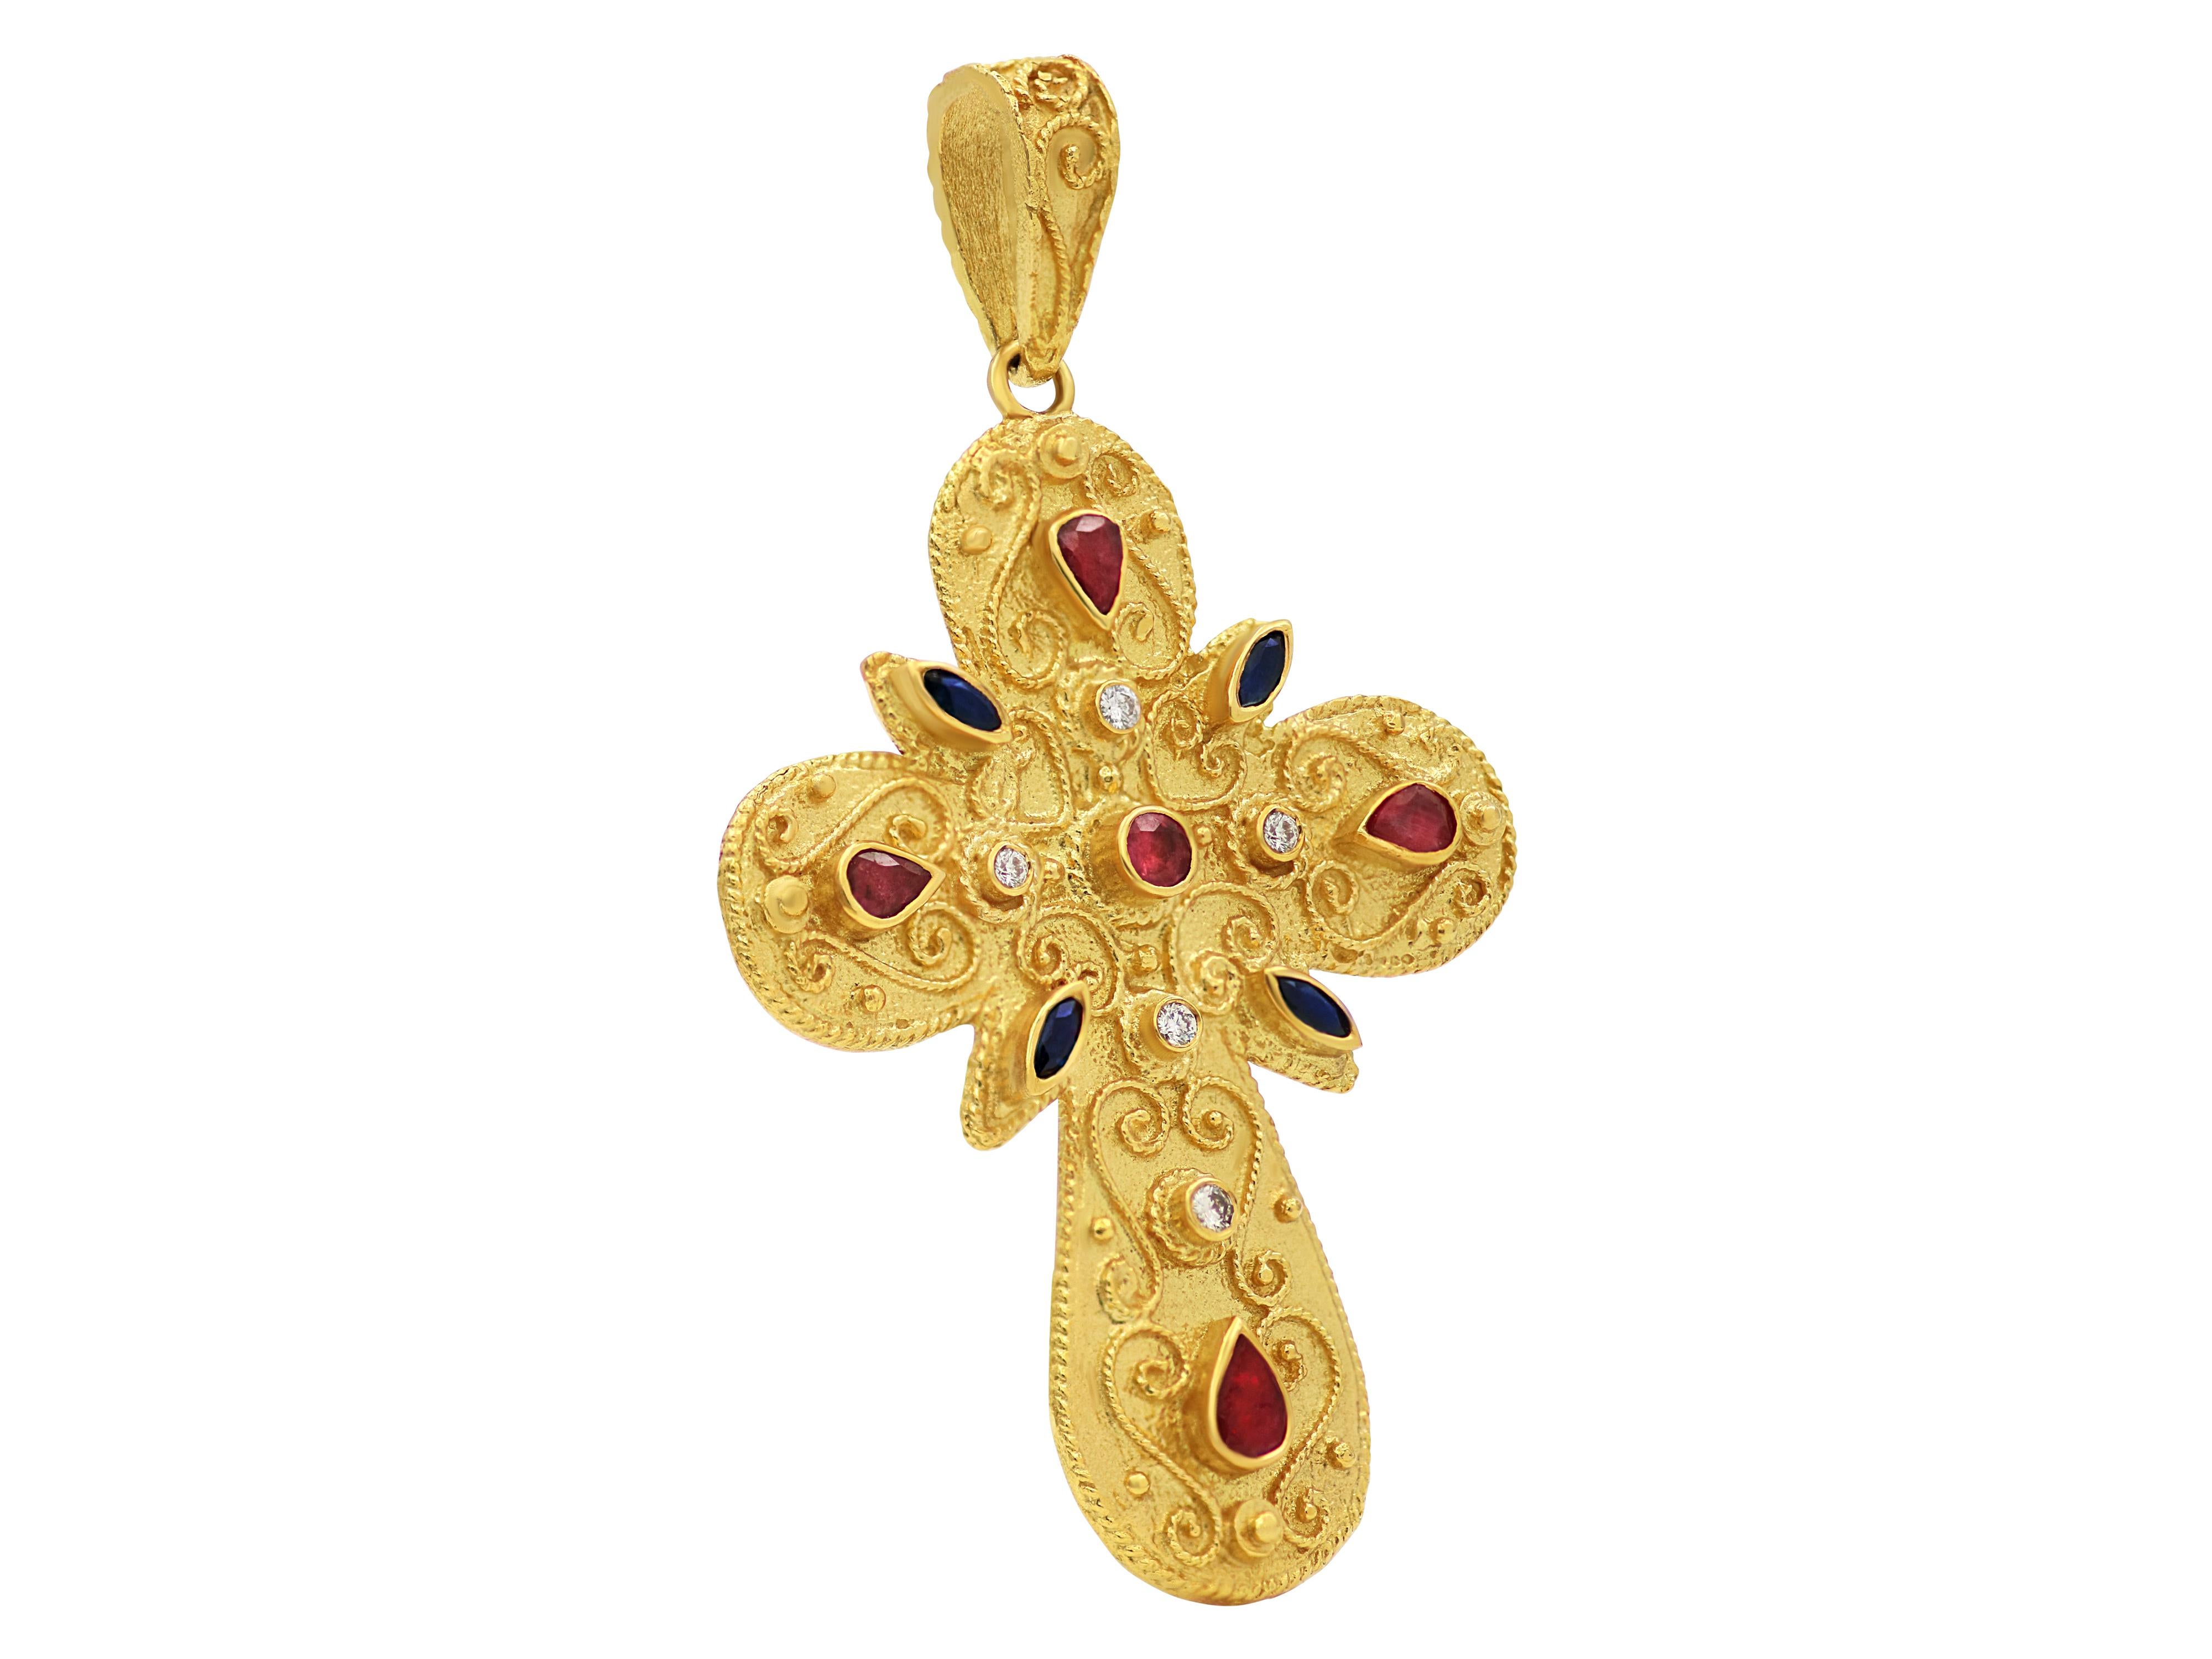 Byzantine cross in 18 karat yellow gold with a dynamic size. A variety of natural gems giving the authentic multicolor look of the Byzantine era. Artwork with filigrees and granulation complete this cross.